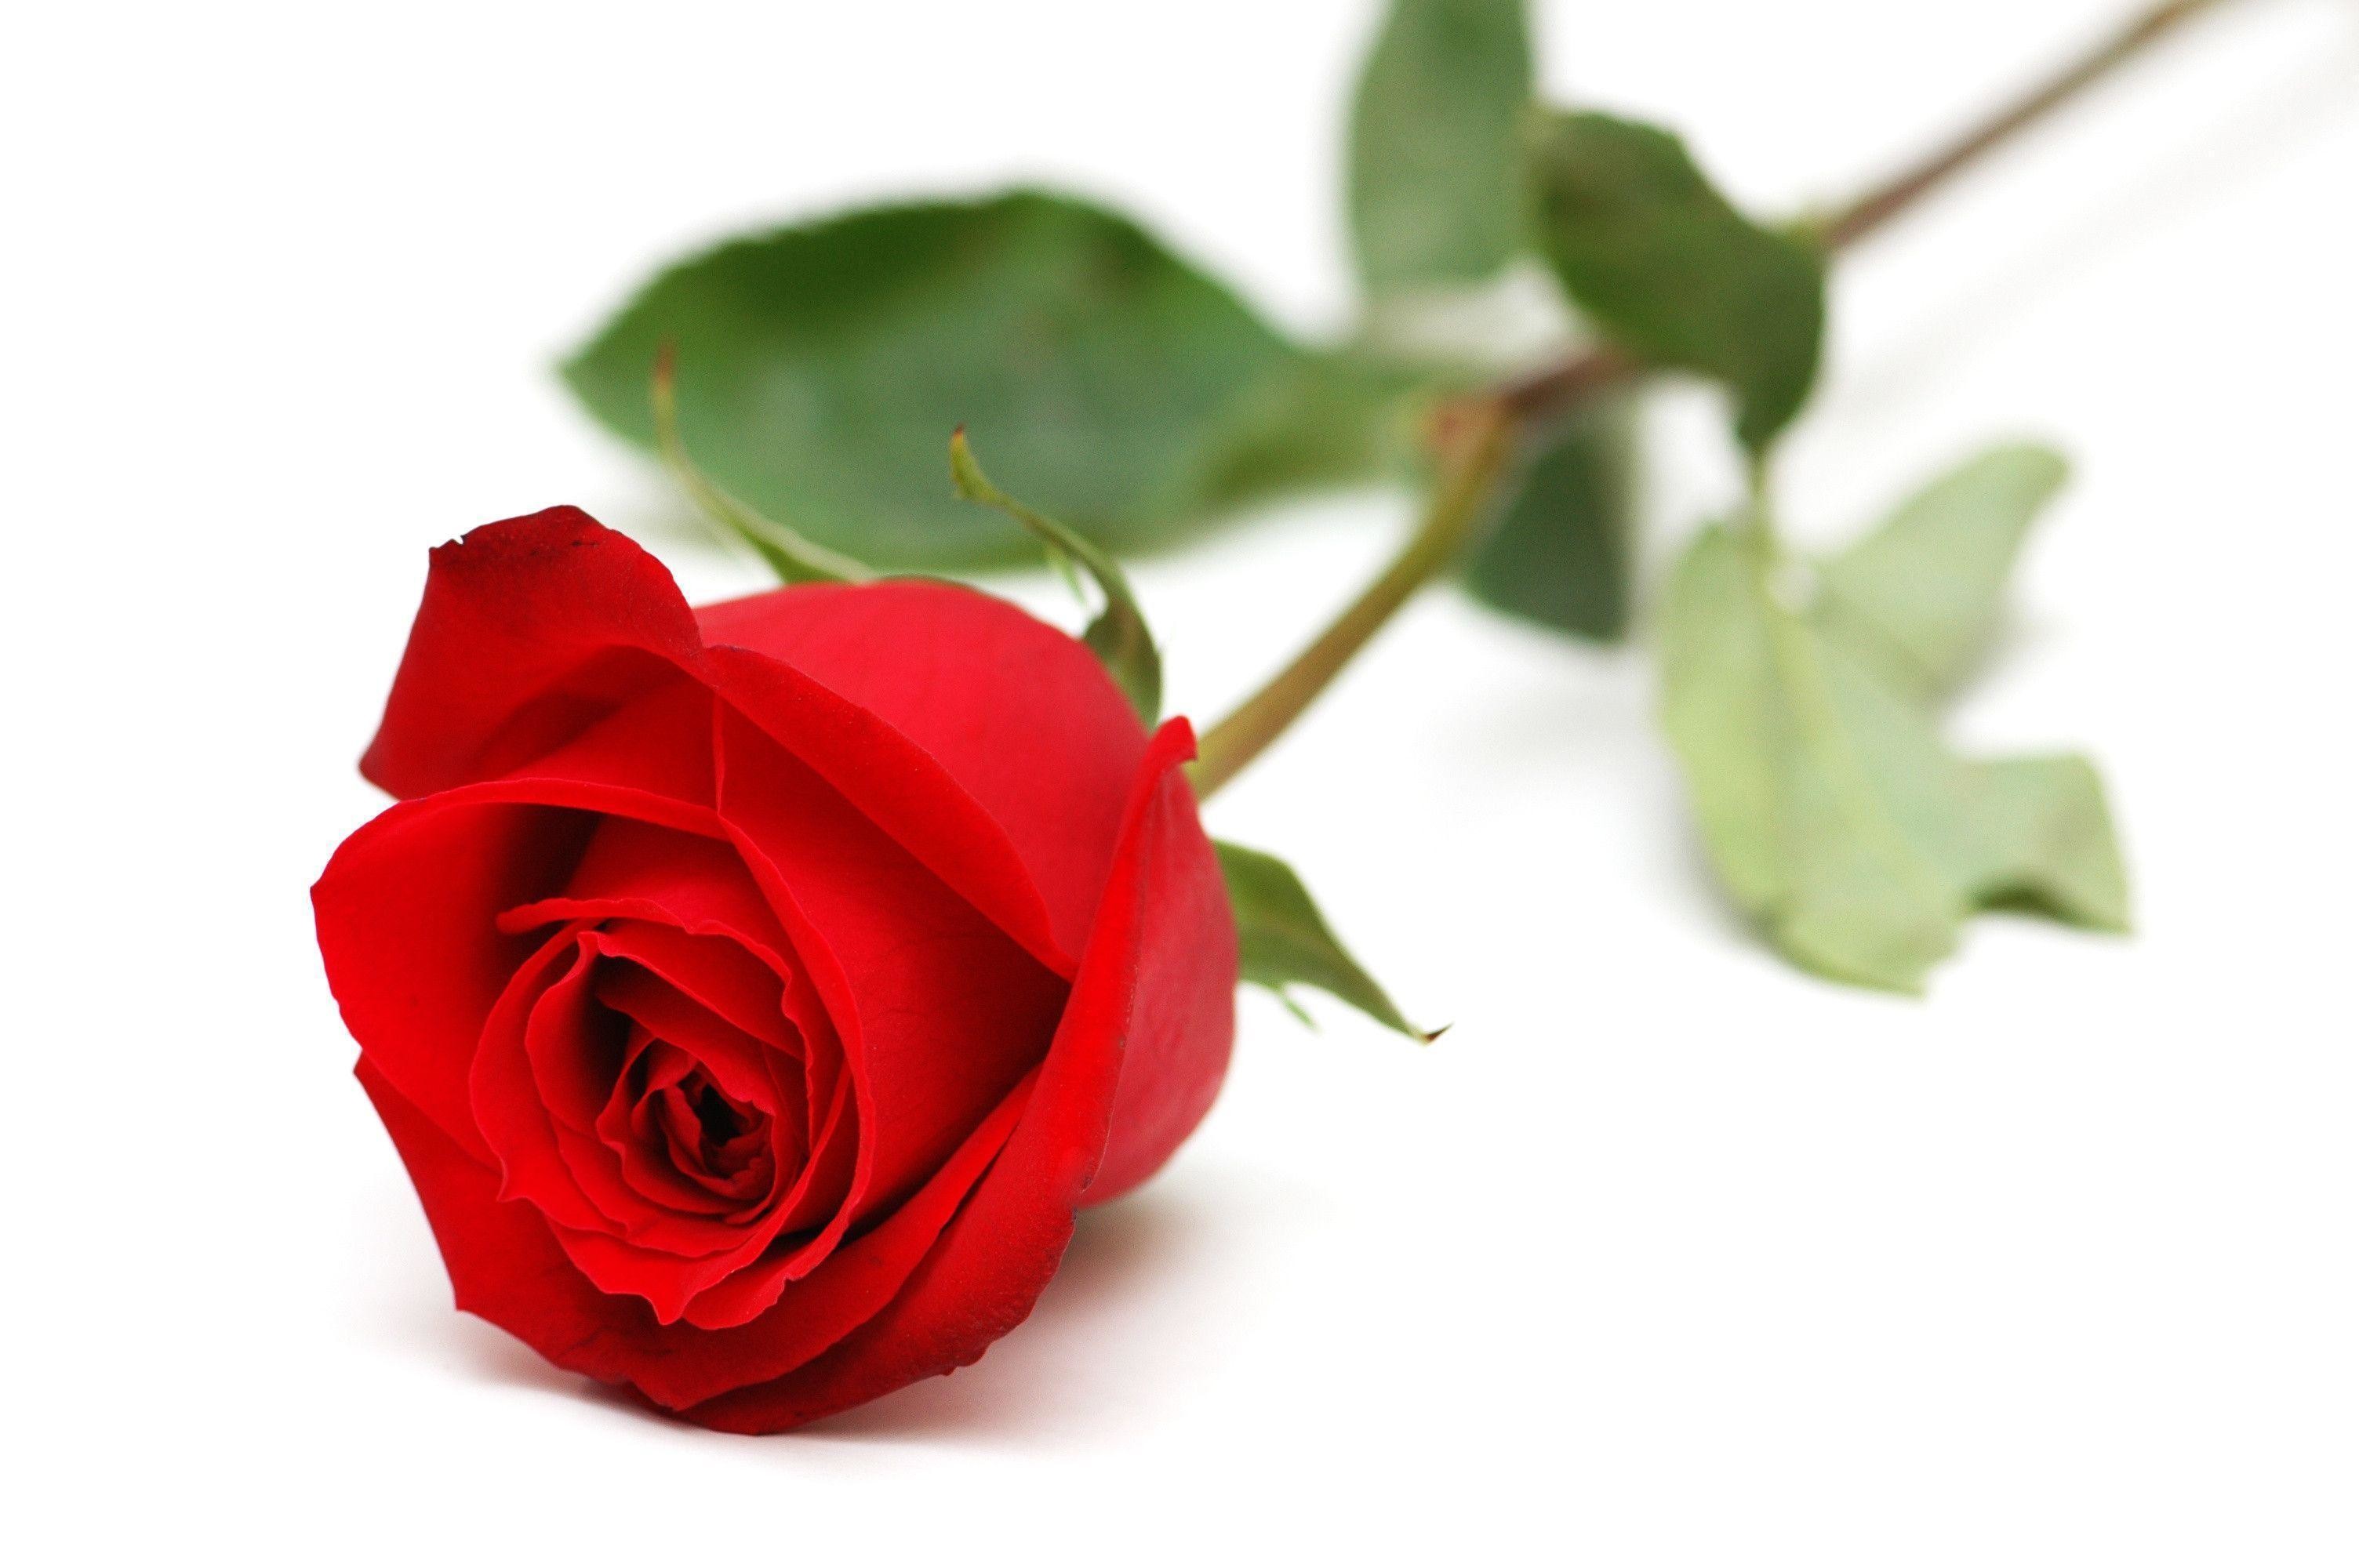 3008x2000 Isolated Red Rose On White Background Royalty Free Stock Photo .